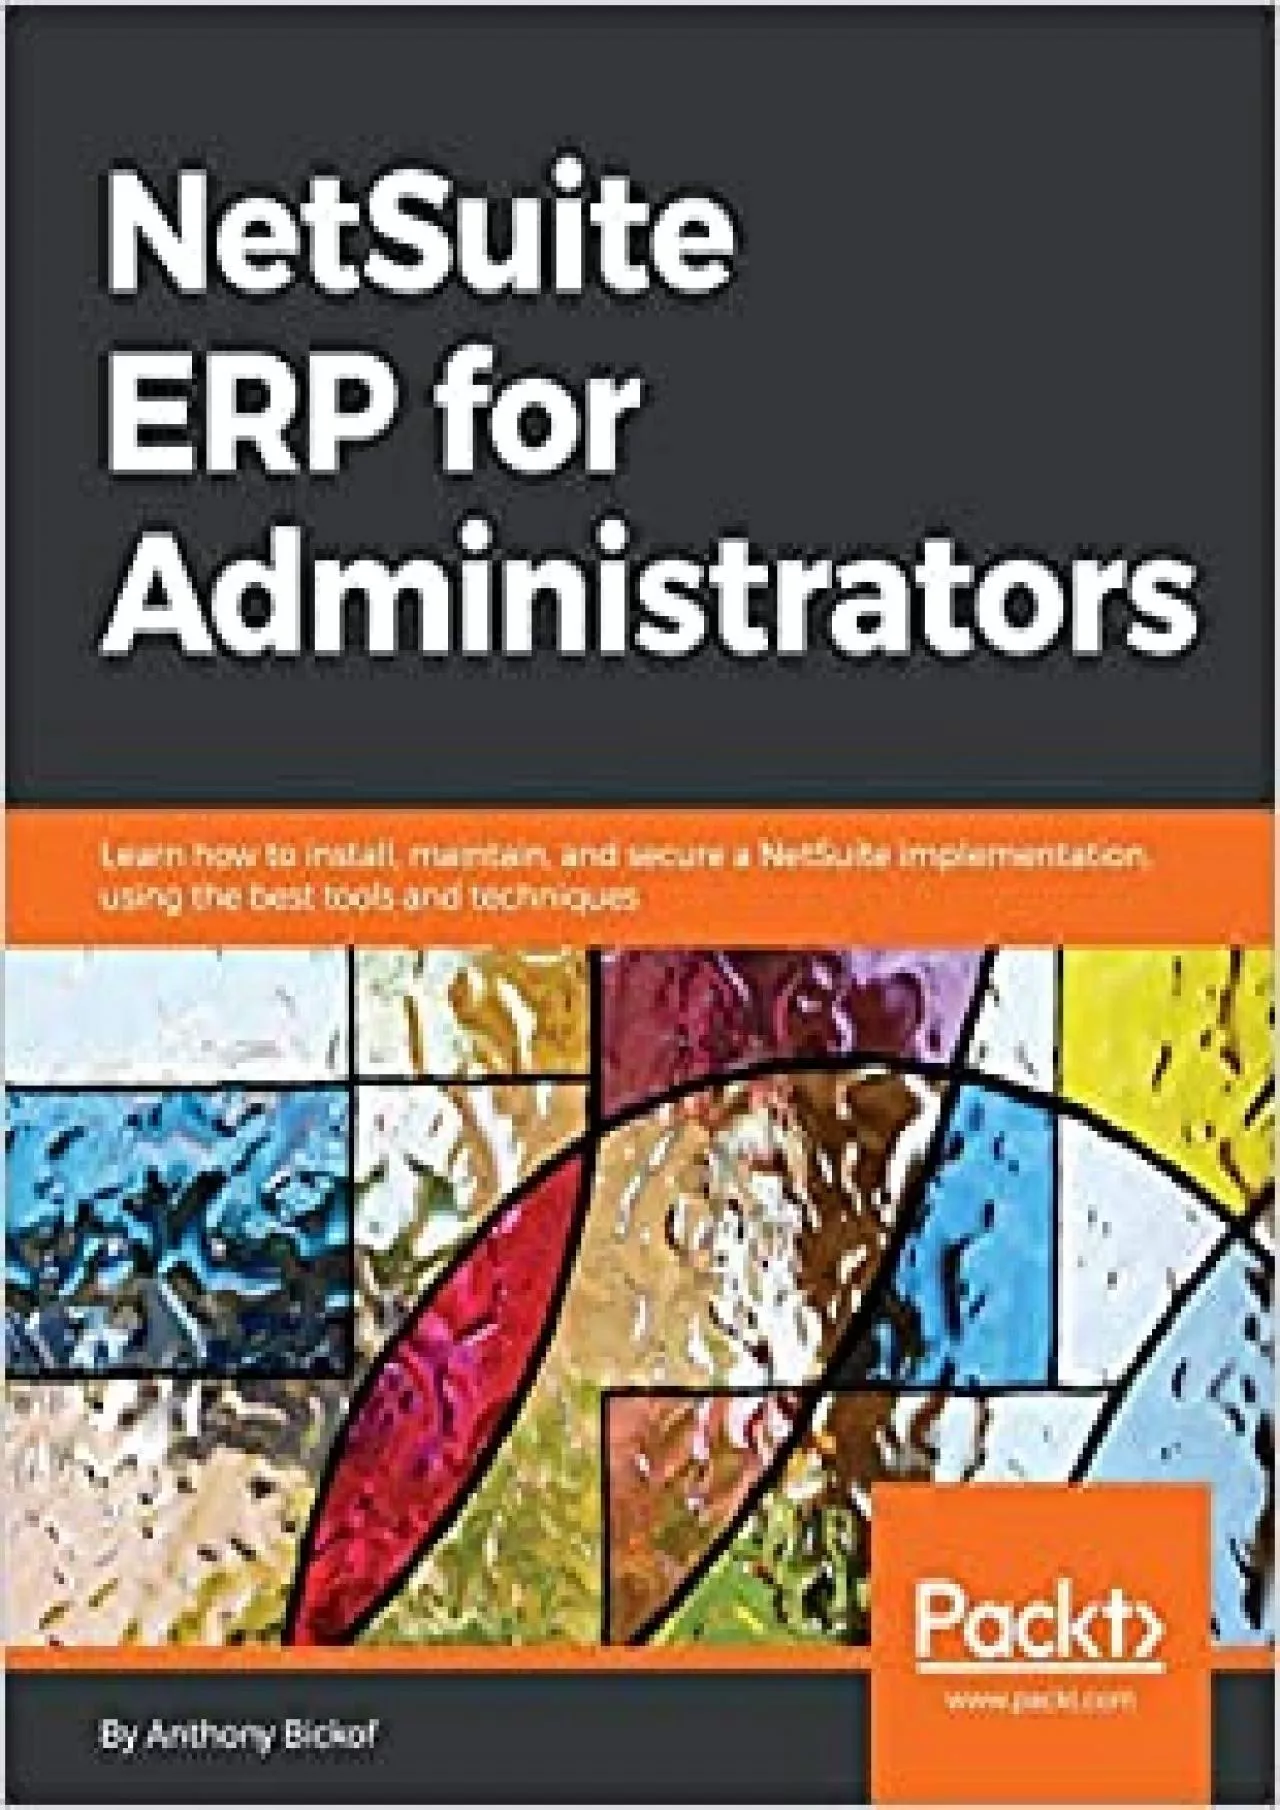 NetSuite ERP for Administrators: Learn how to install, maintain, and secure a NetSuite